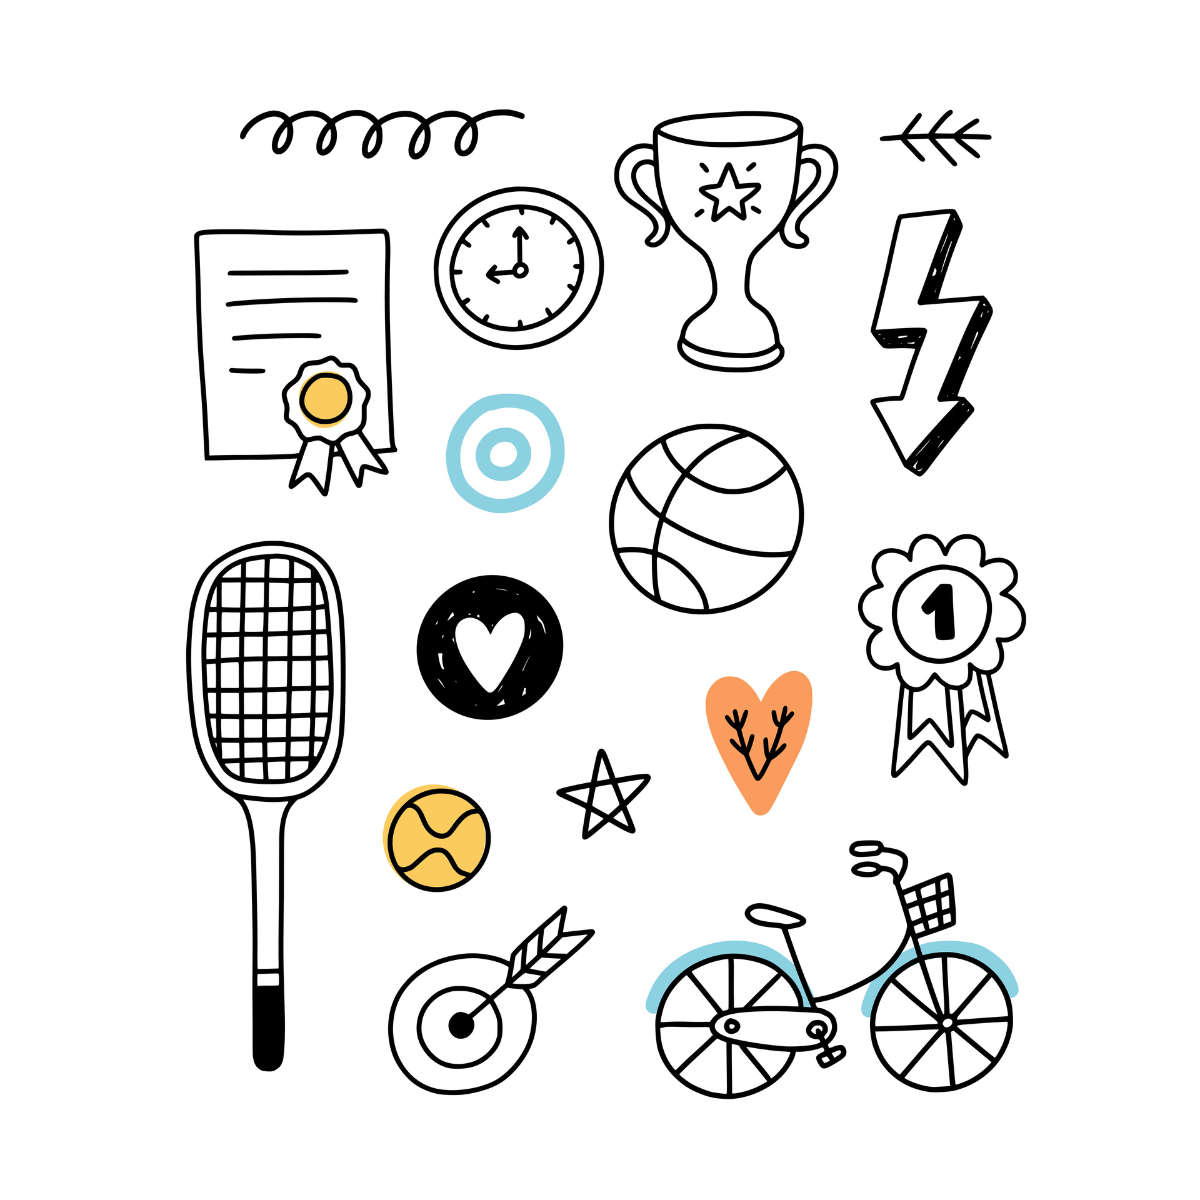 Sports drawings, including darts, bicycle, tennis